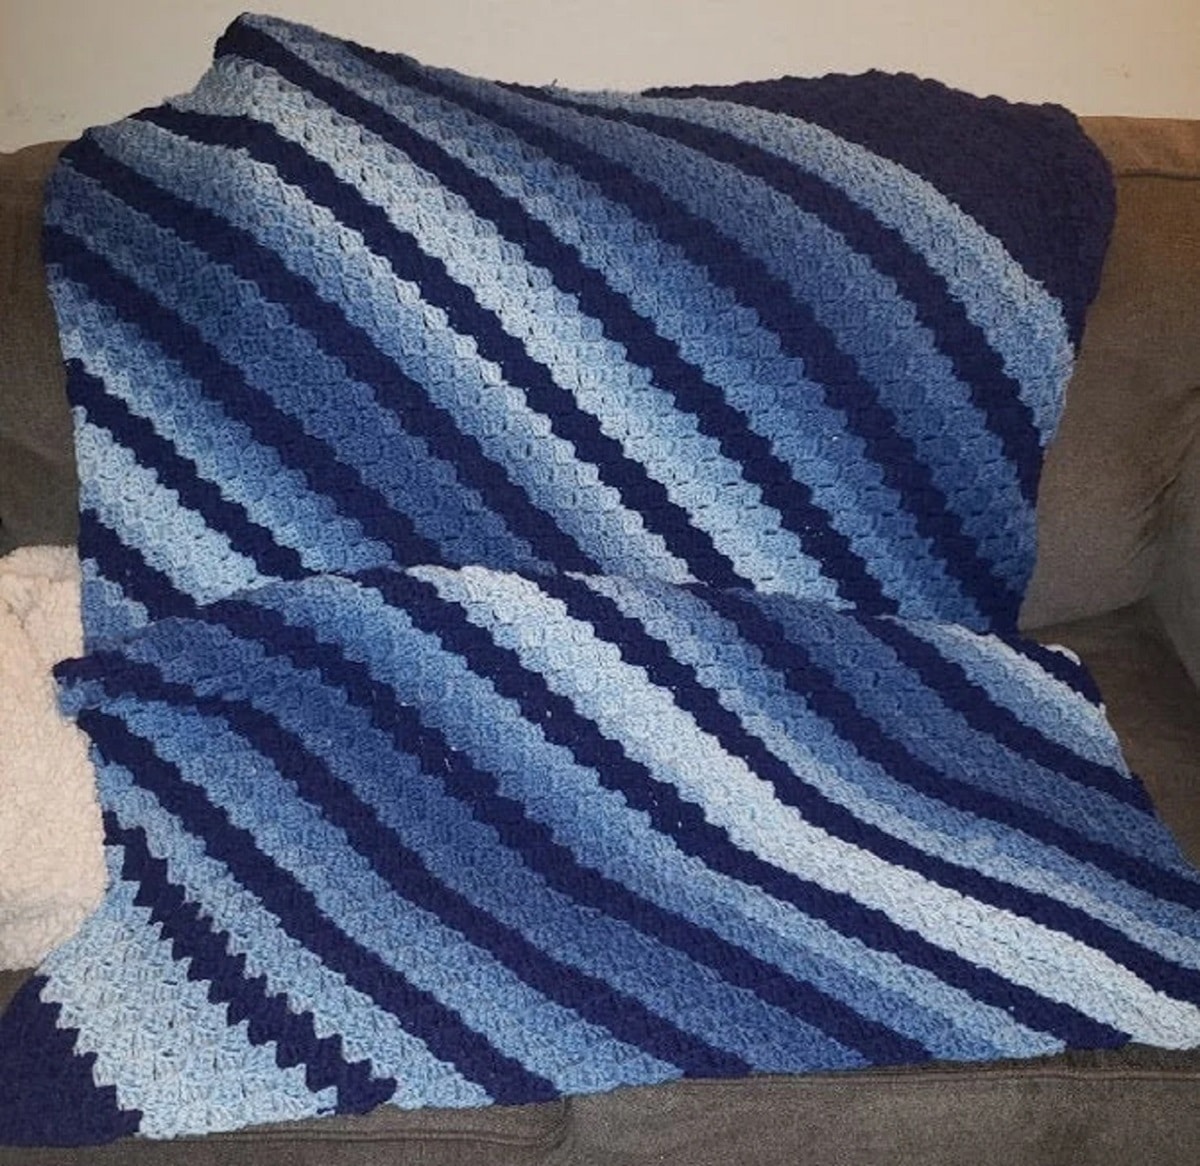  Large corner to corner throw with dark blue, light blue, and white diagonal stripes draped over a brown sofa. 